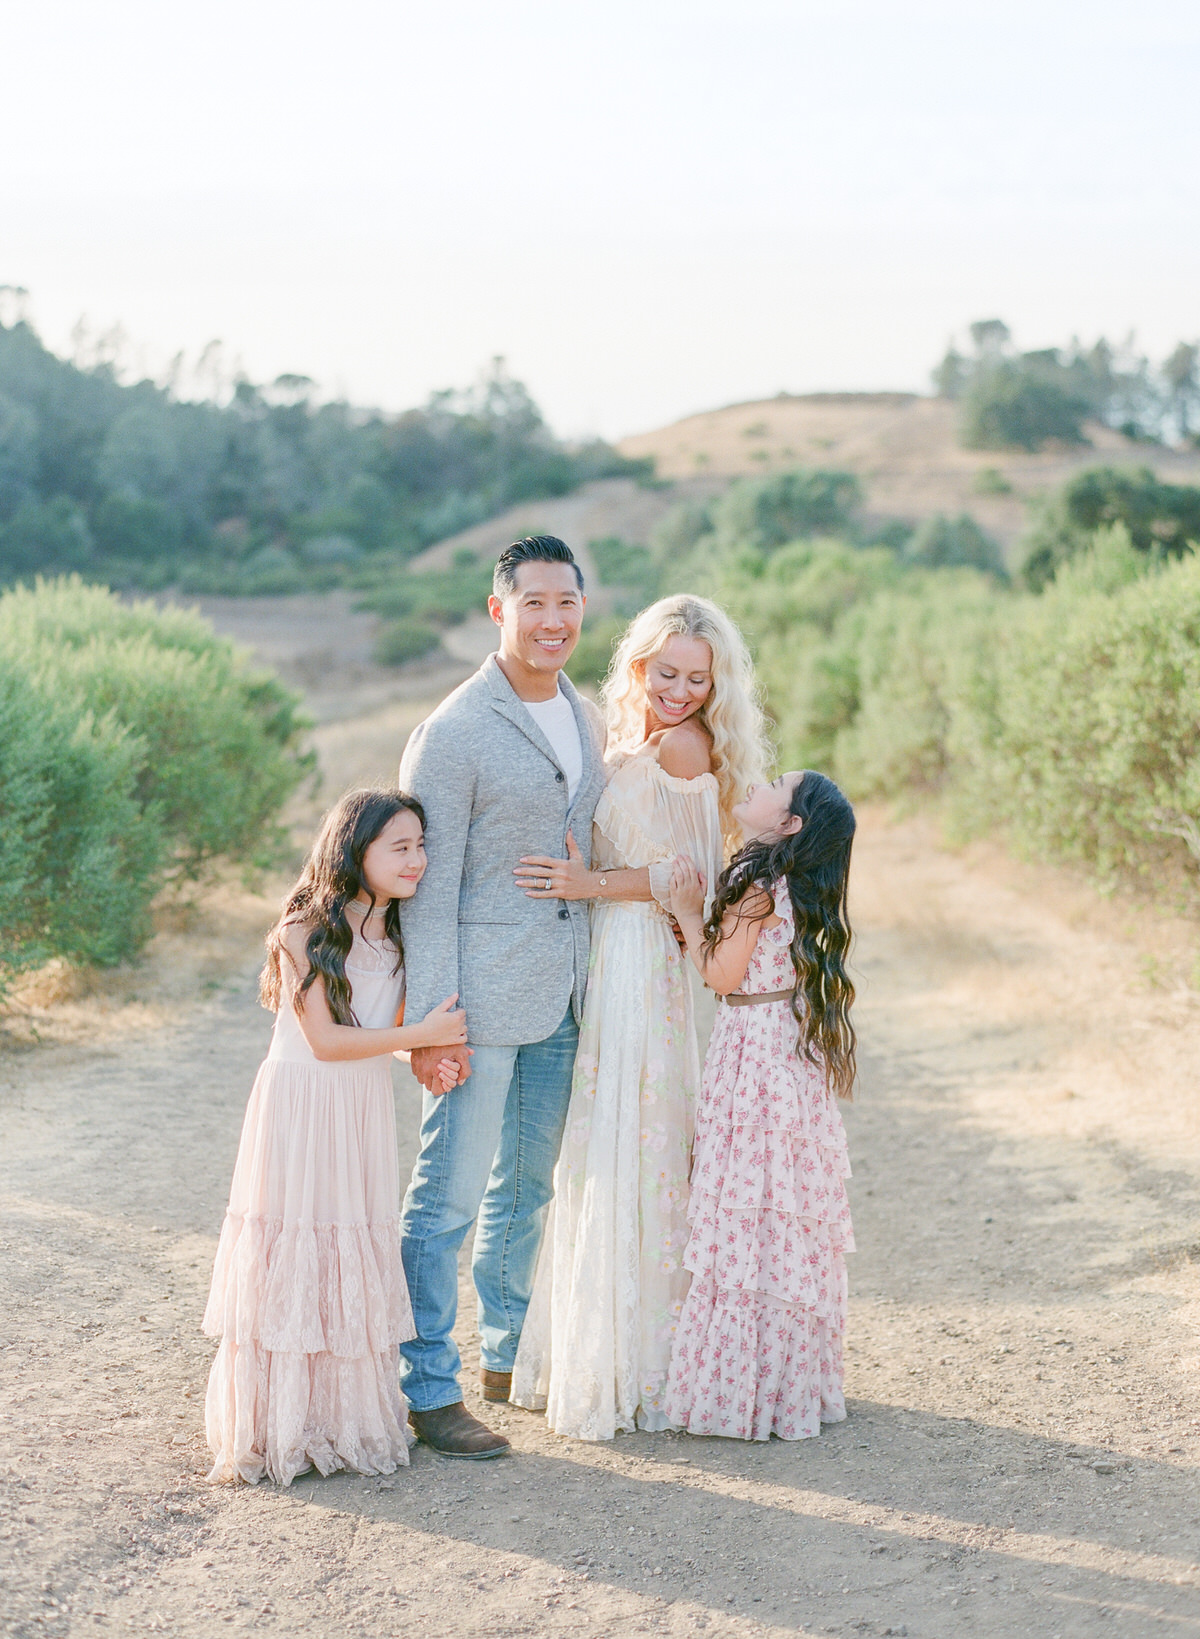 Bay Area Family Photography on Film Kent Avenue Photography